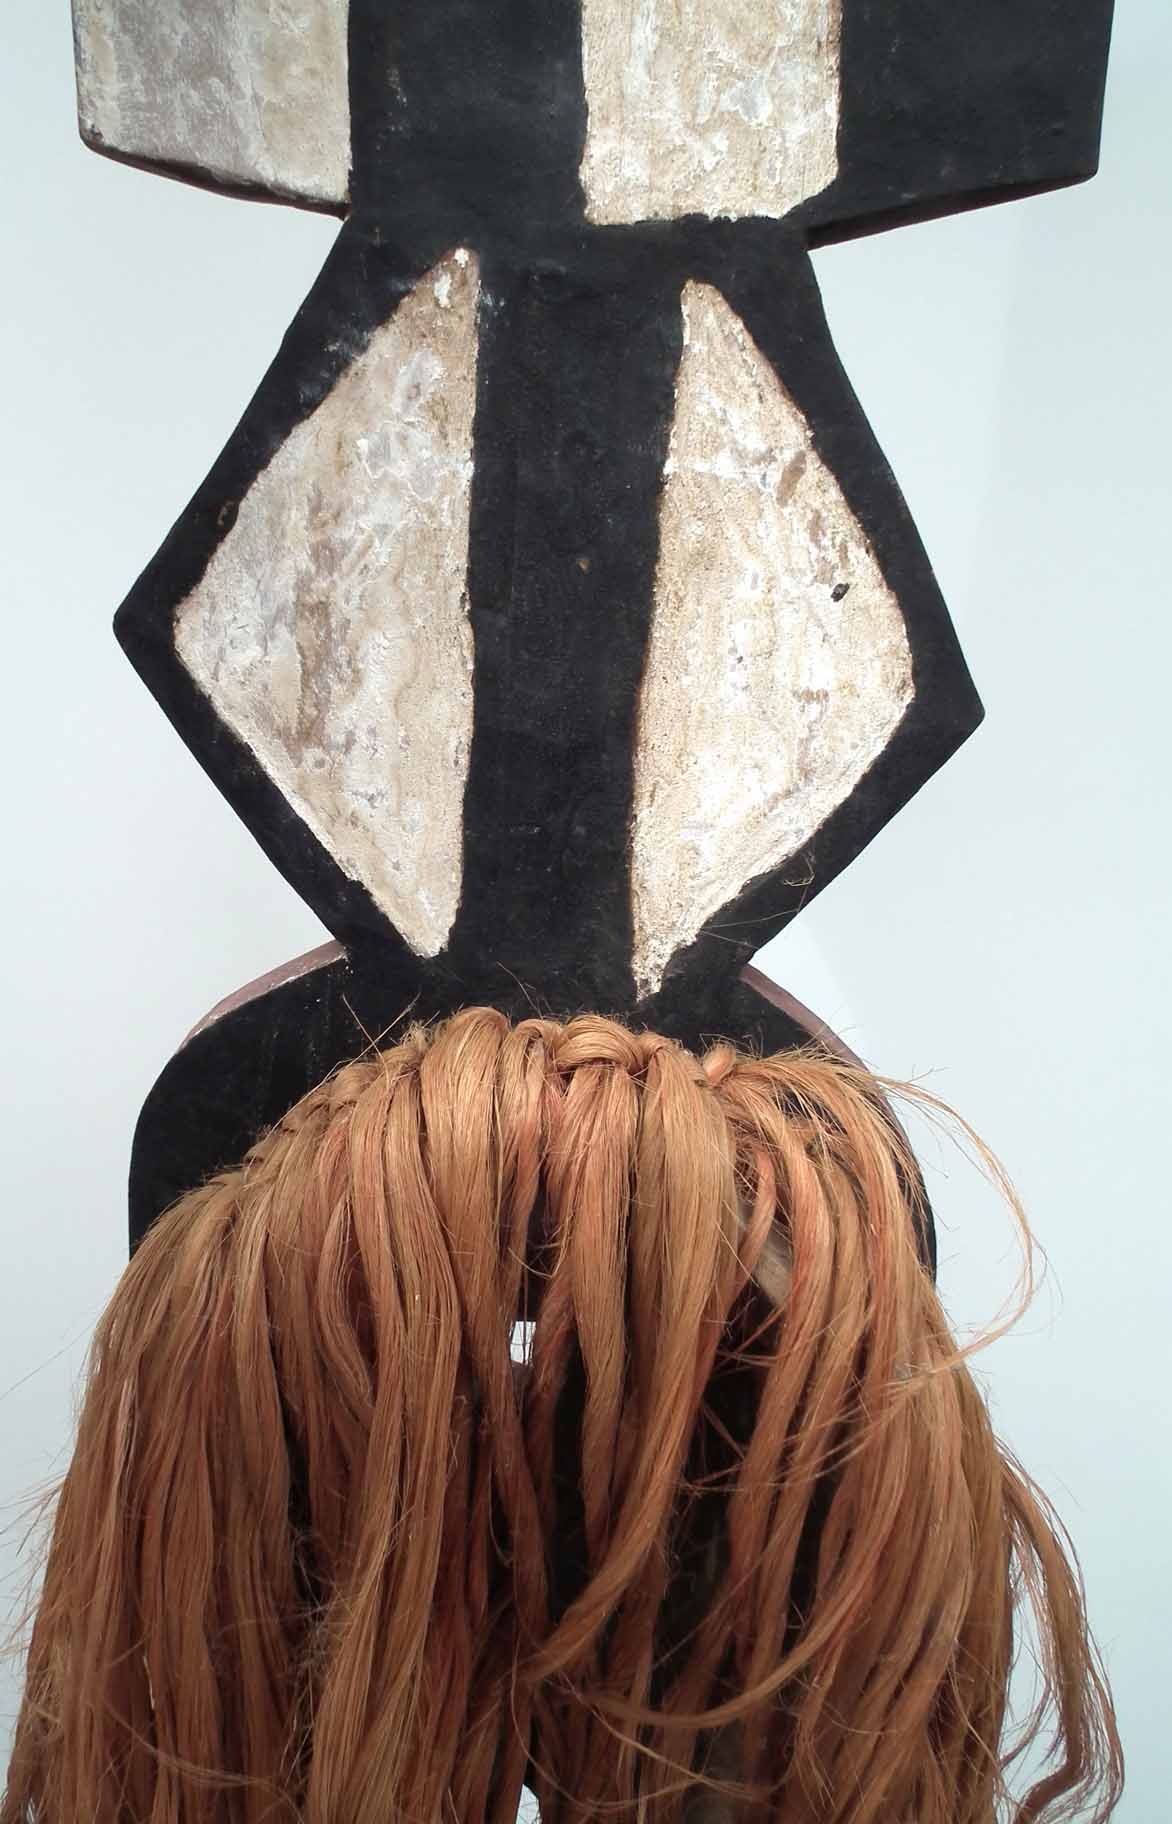 Bobo Bwa plank mask fron Hounde area of Burkina Faso, wood, pigment and fibres, 147cm high excluding - Image 8 of 13